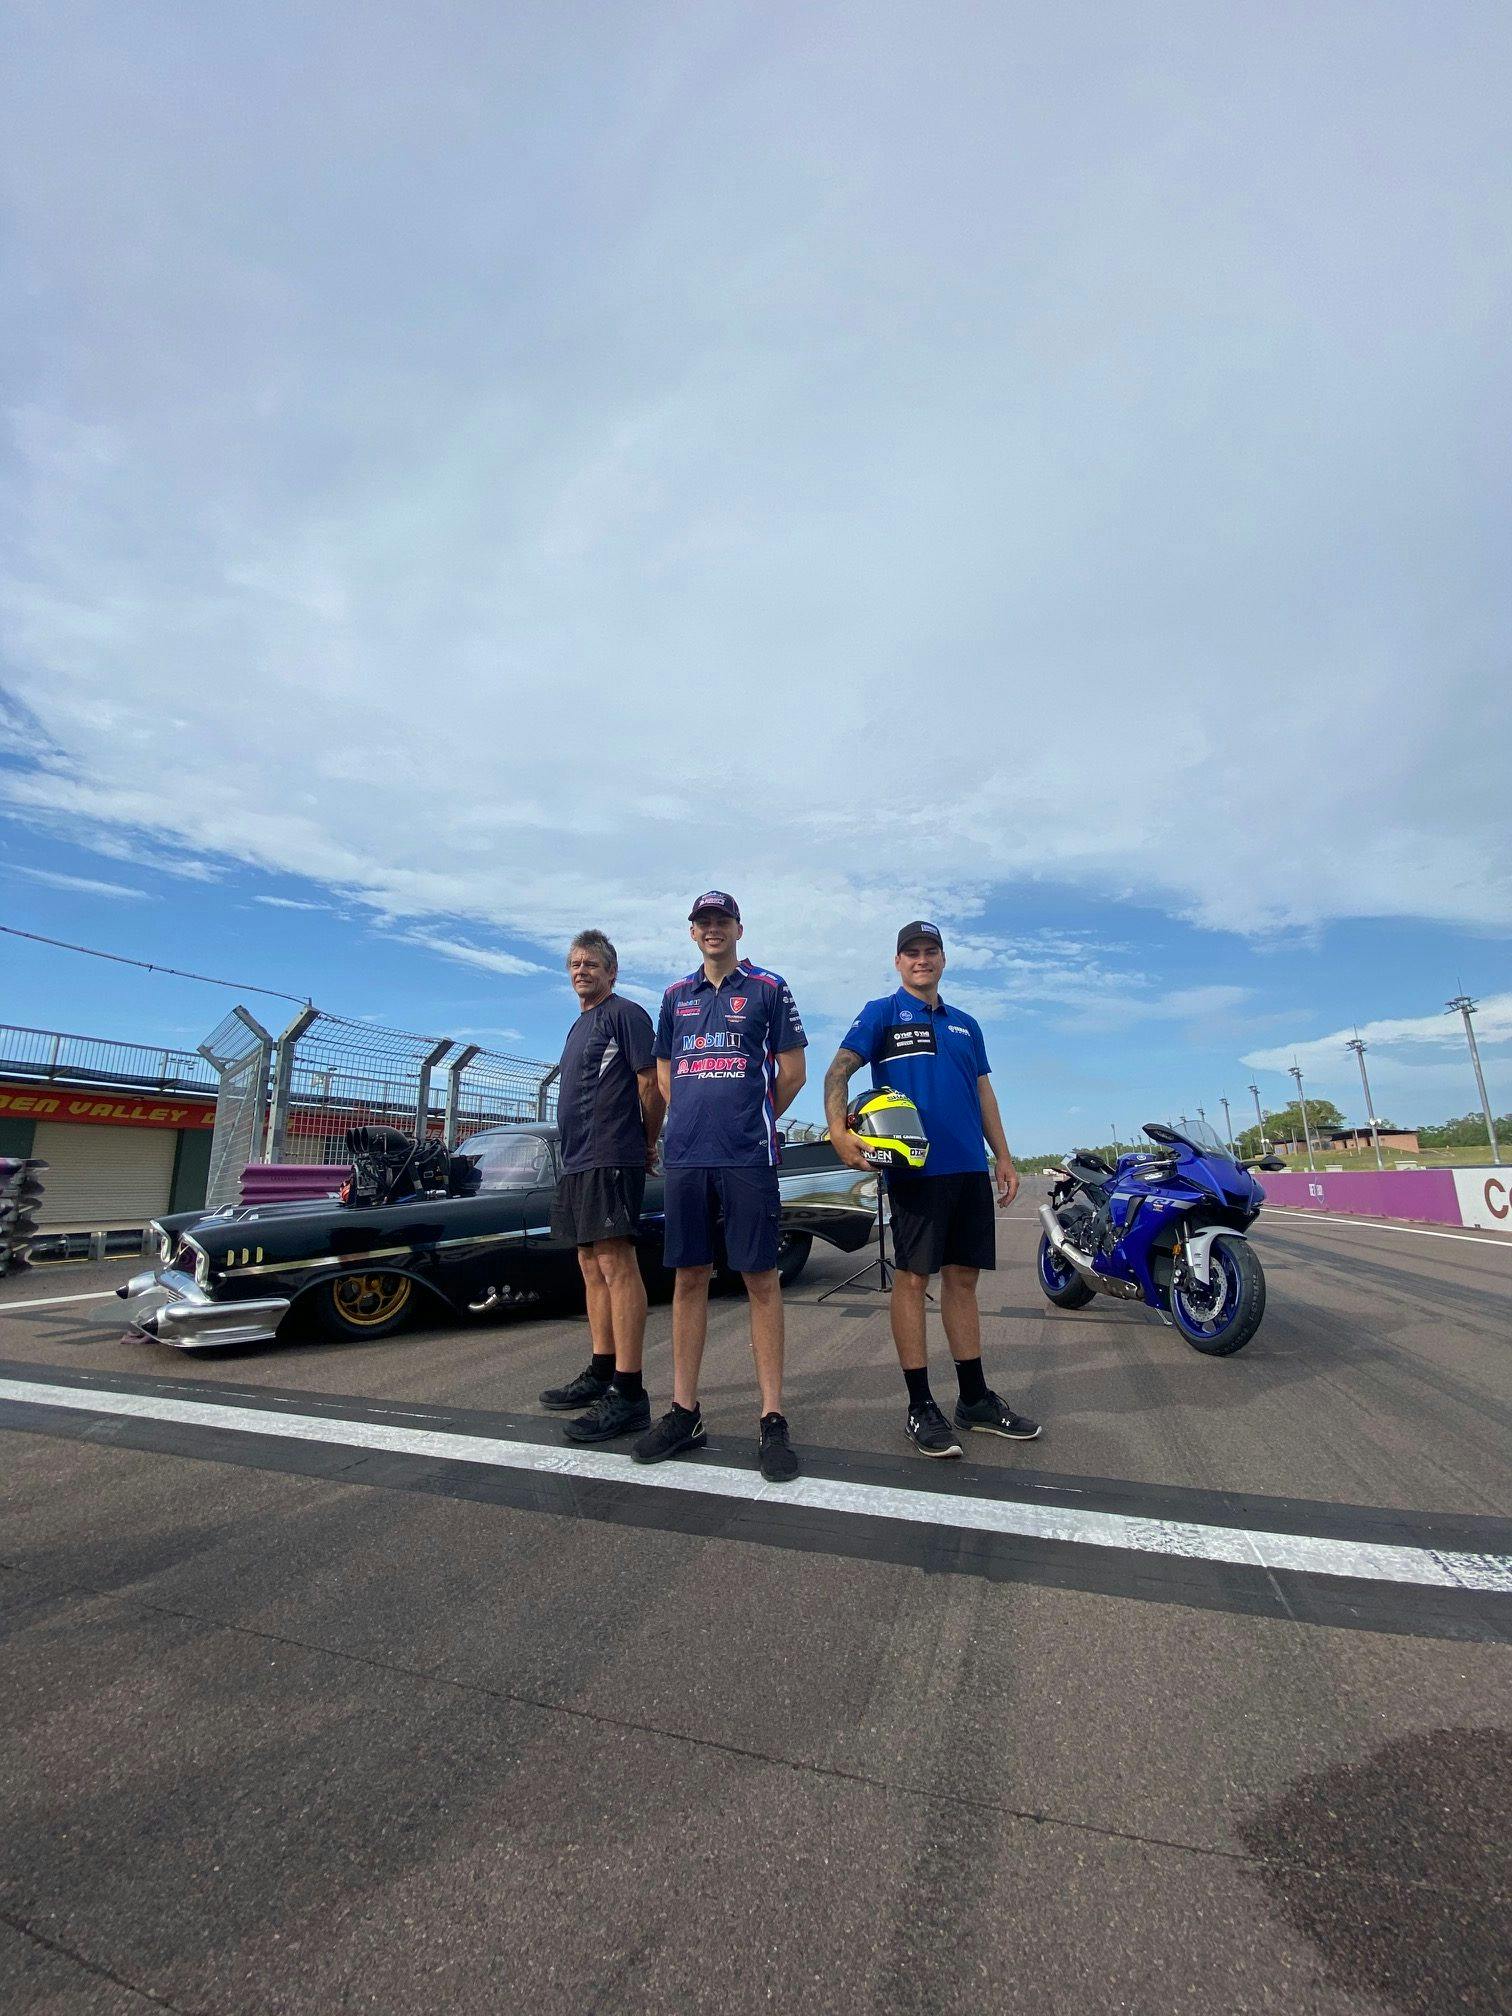 Mat Abel from Hidden Valley Drag Racing Association, Supercars driver Bryce Fullwood and Australian Superbikes rider Aiden Wagner at Hidden Valley